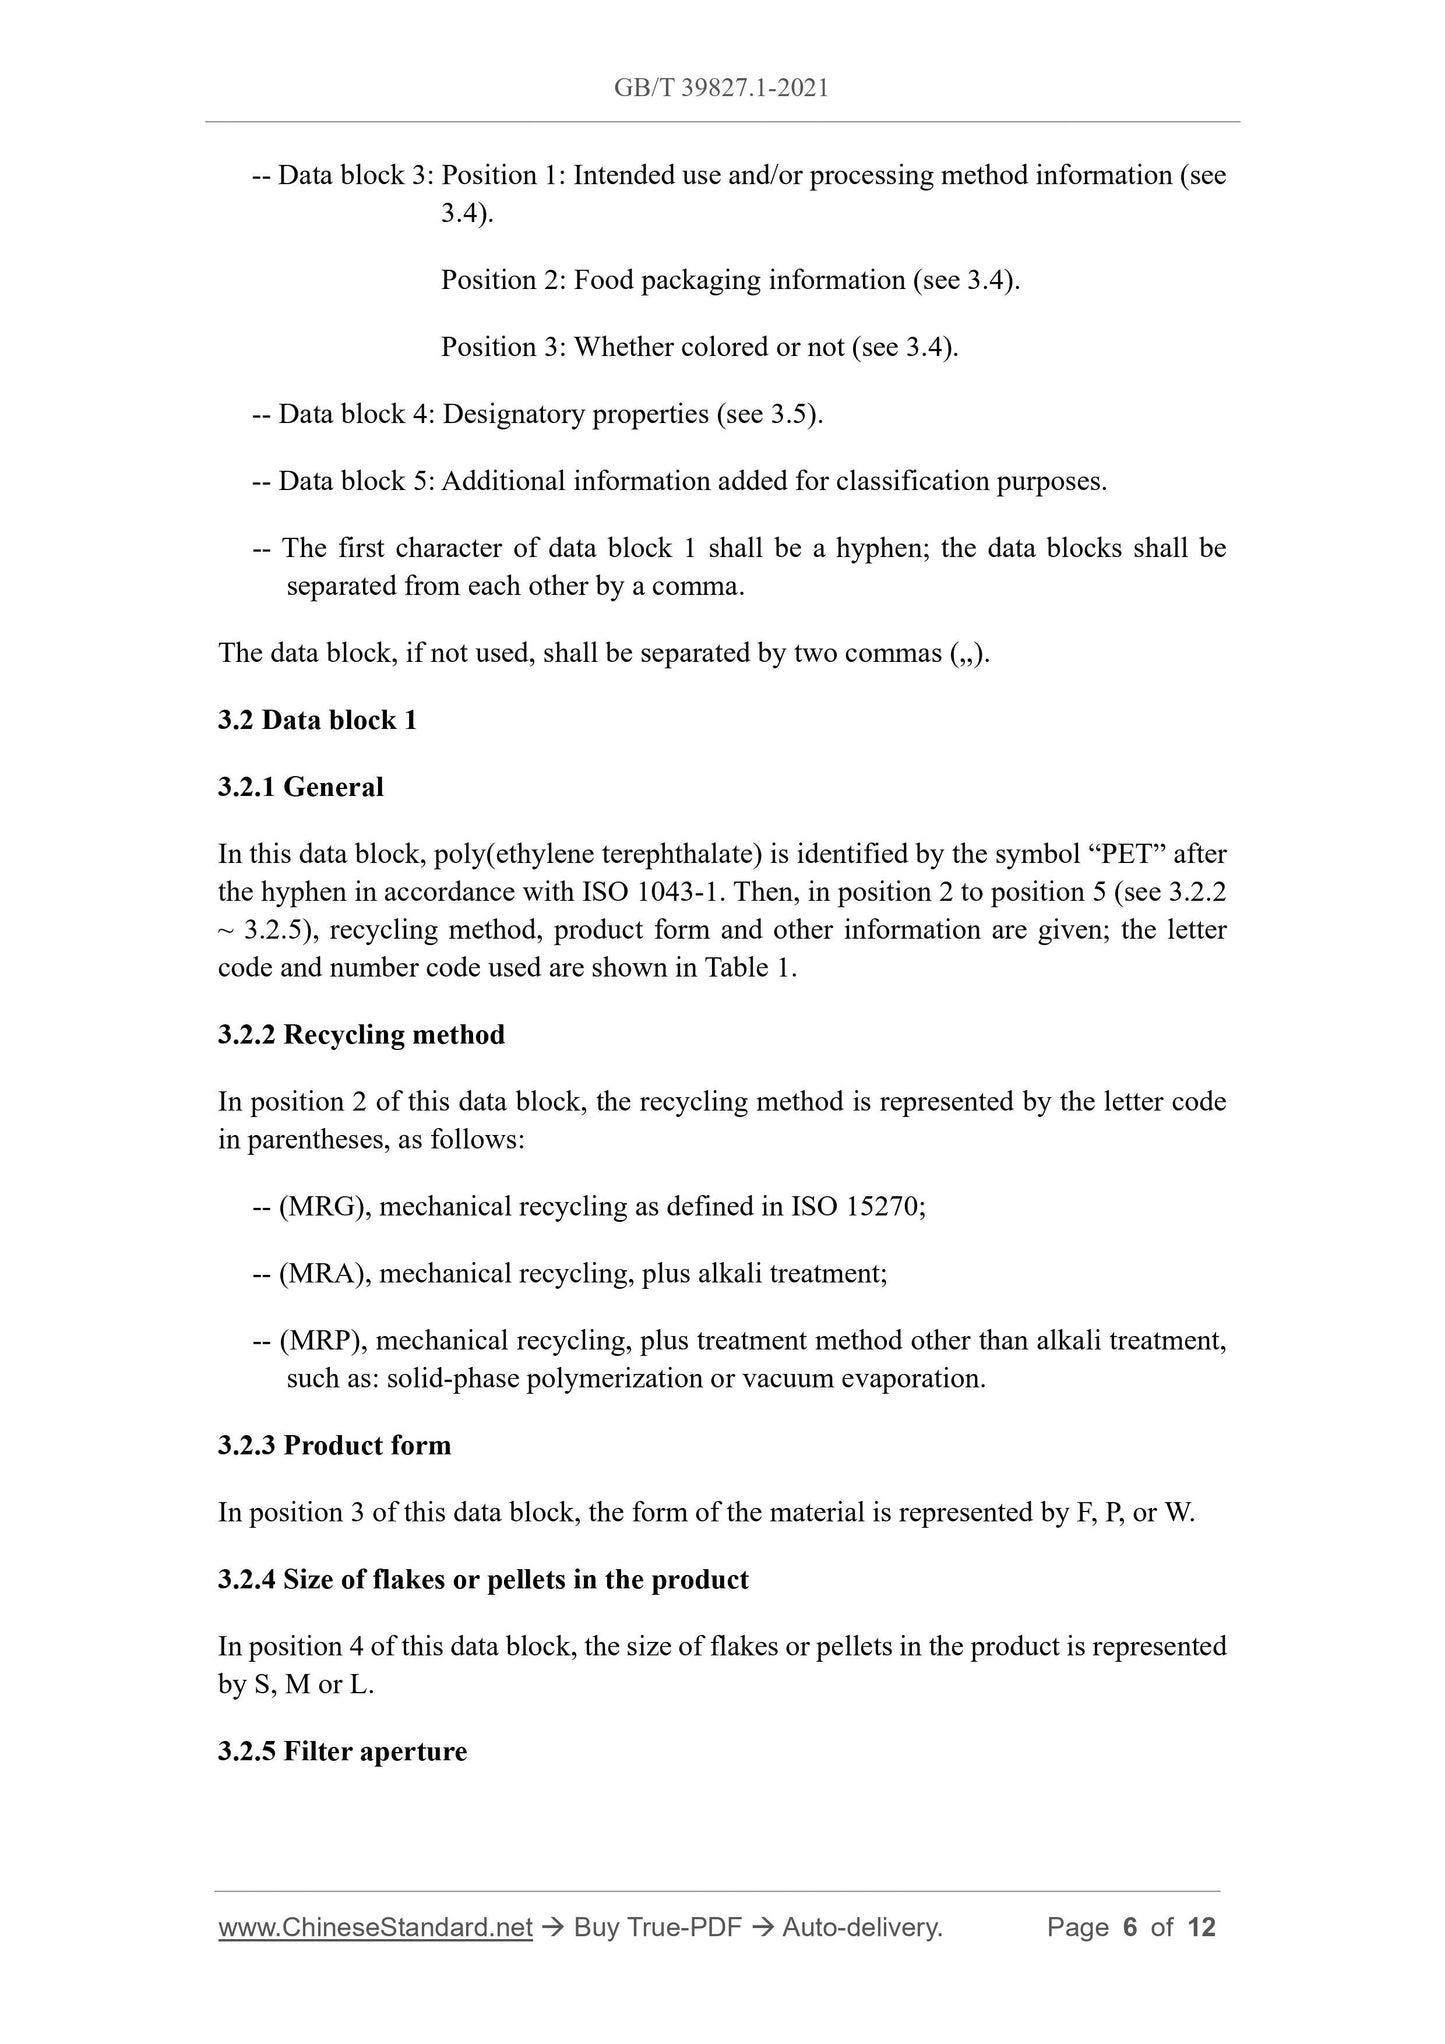 GB/T 39827.1-2021 Page 4